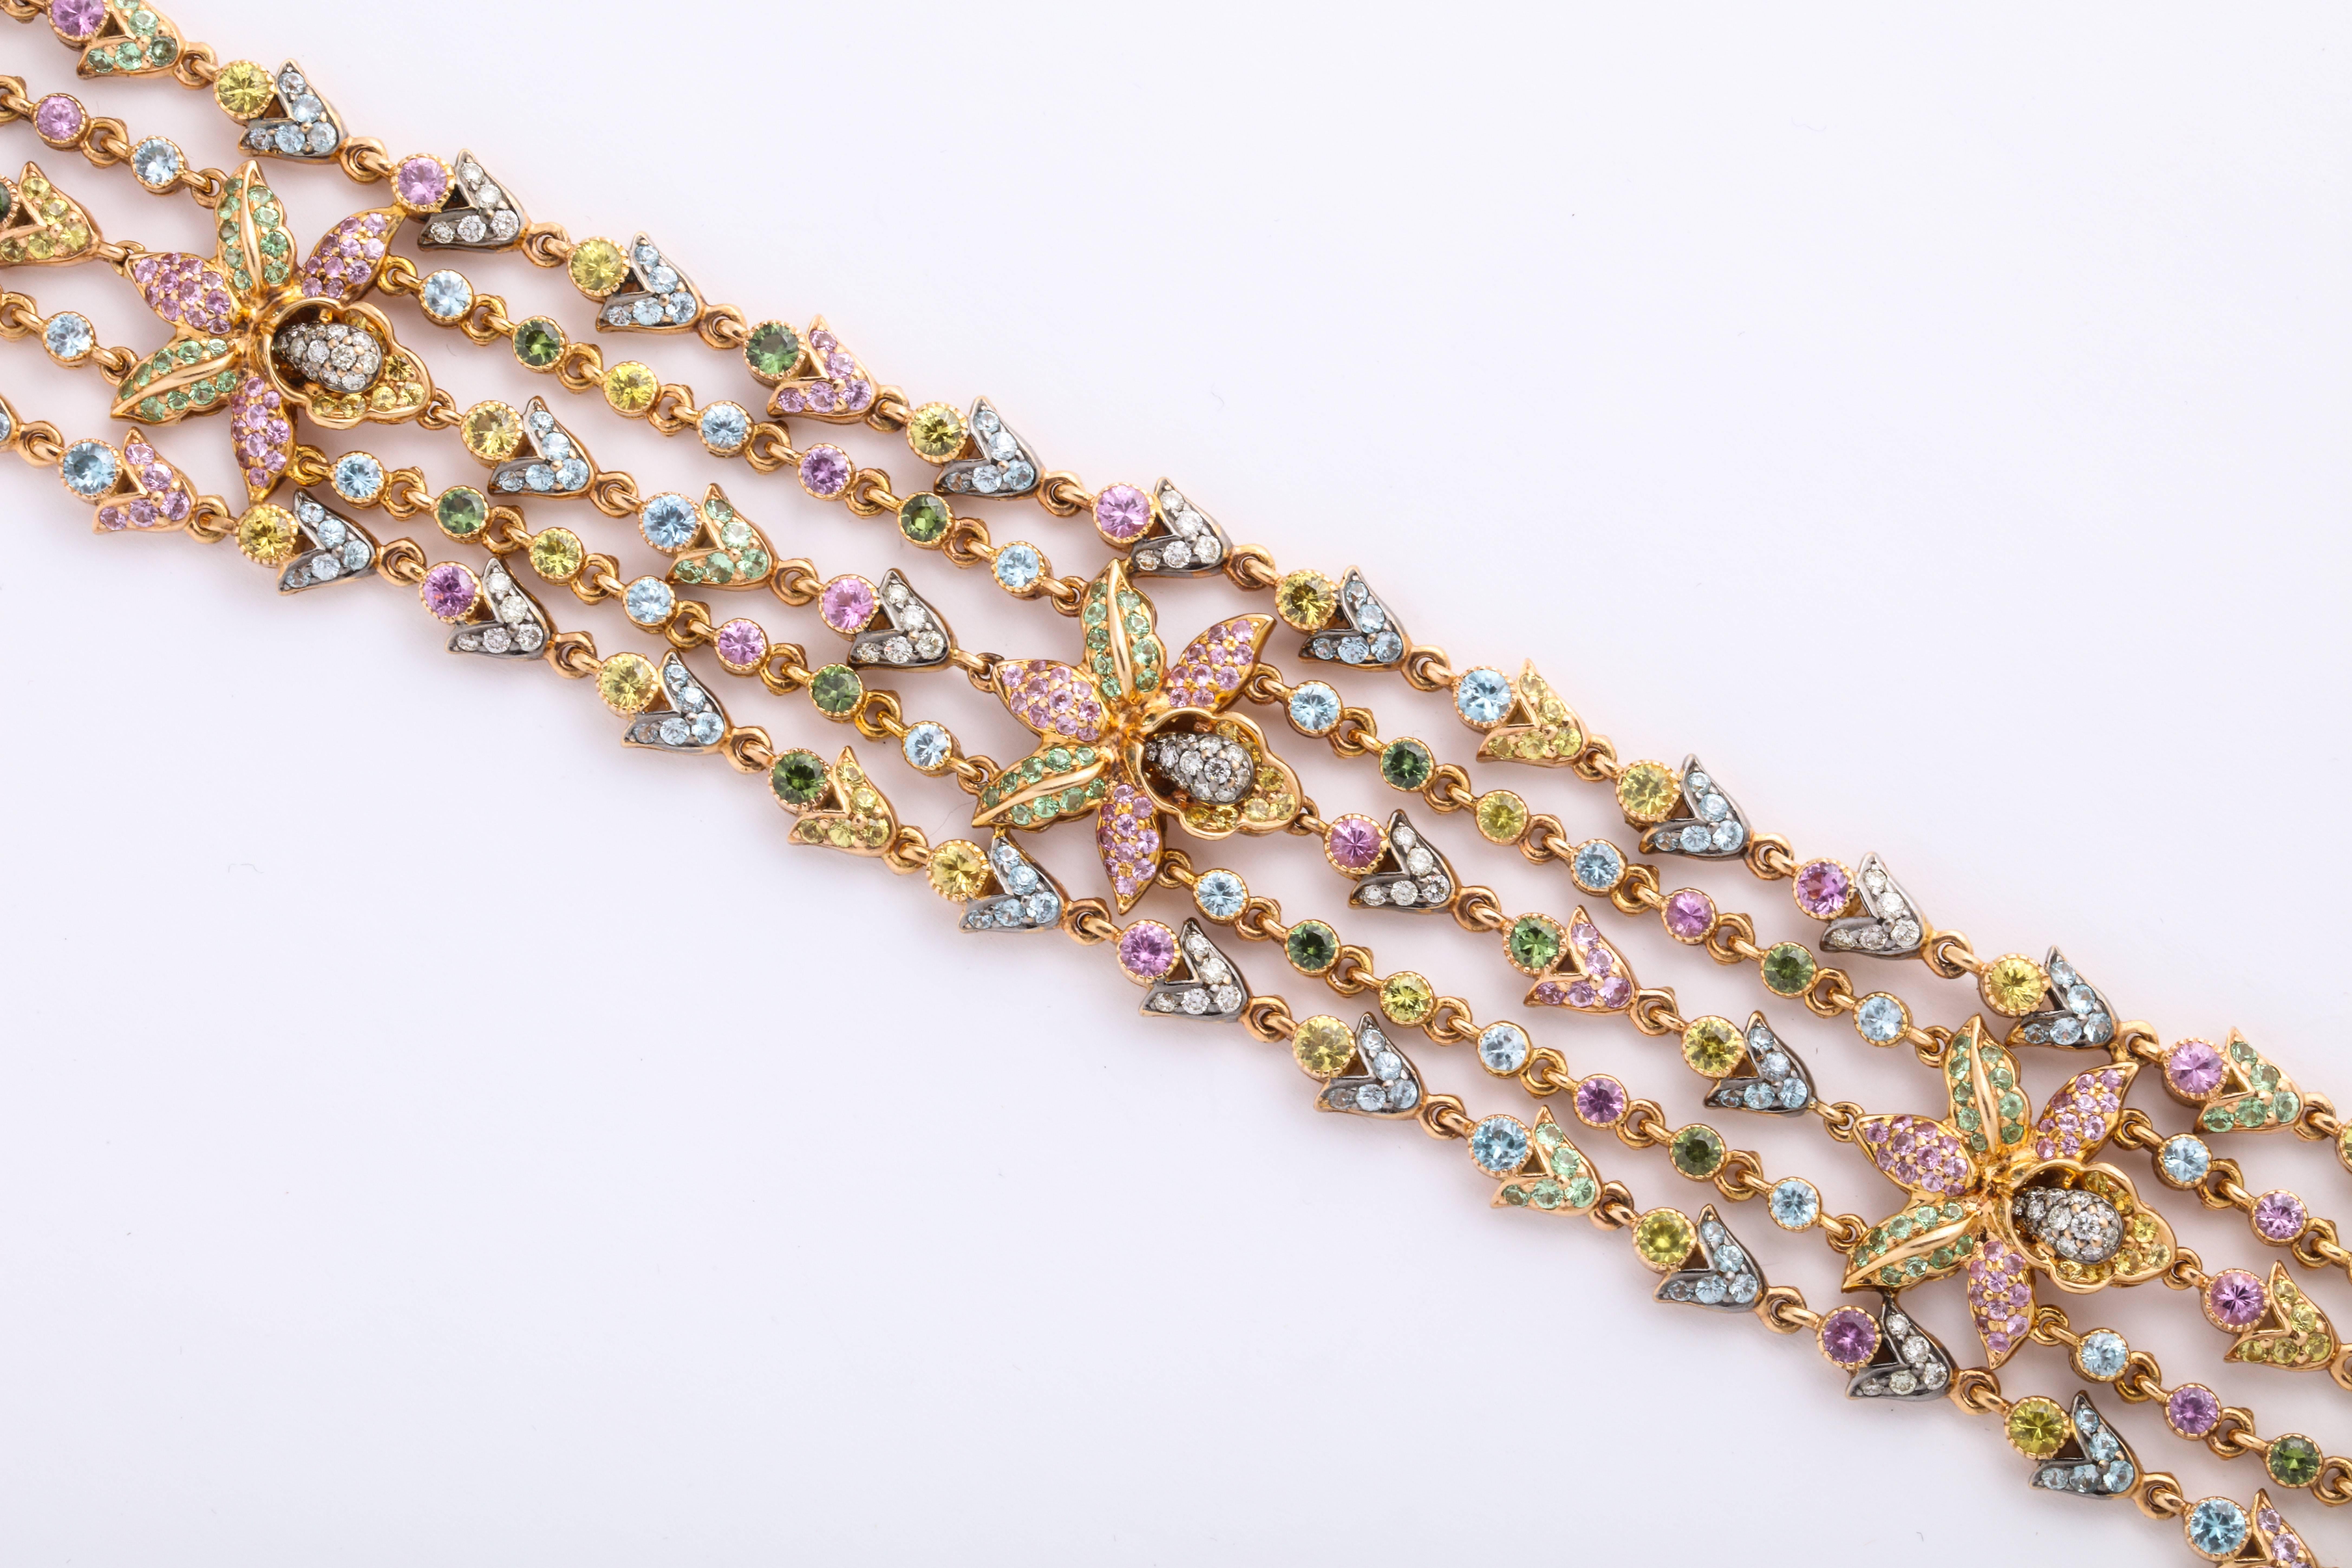 18 Karat Rose Gold articulating 5-strand articulating strap bracelet mounted with 3 FLORAL stations decorated with round brilliant-cut diamonds: 1.57 carats, yellow sapphires: 2.98 carats, green garnets (tsavorite): 2.06 carats, yellow sapphires: